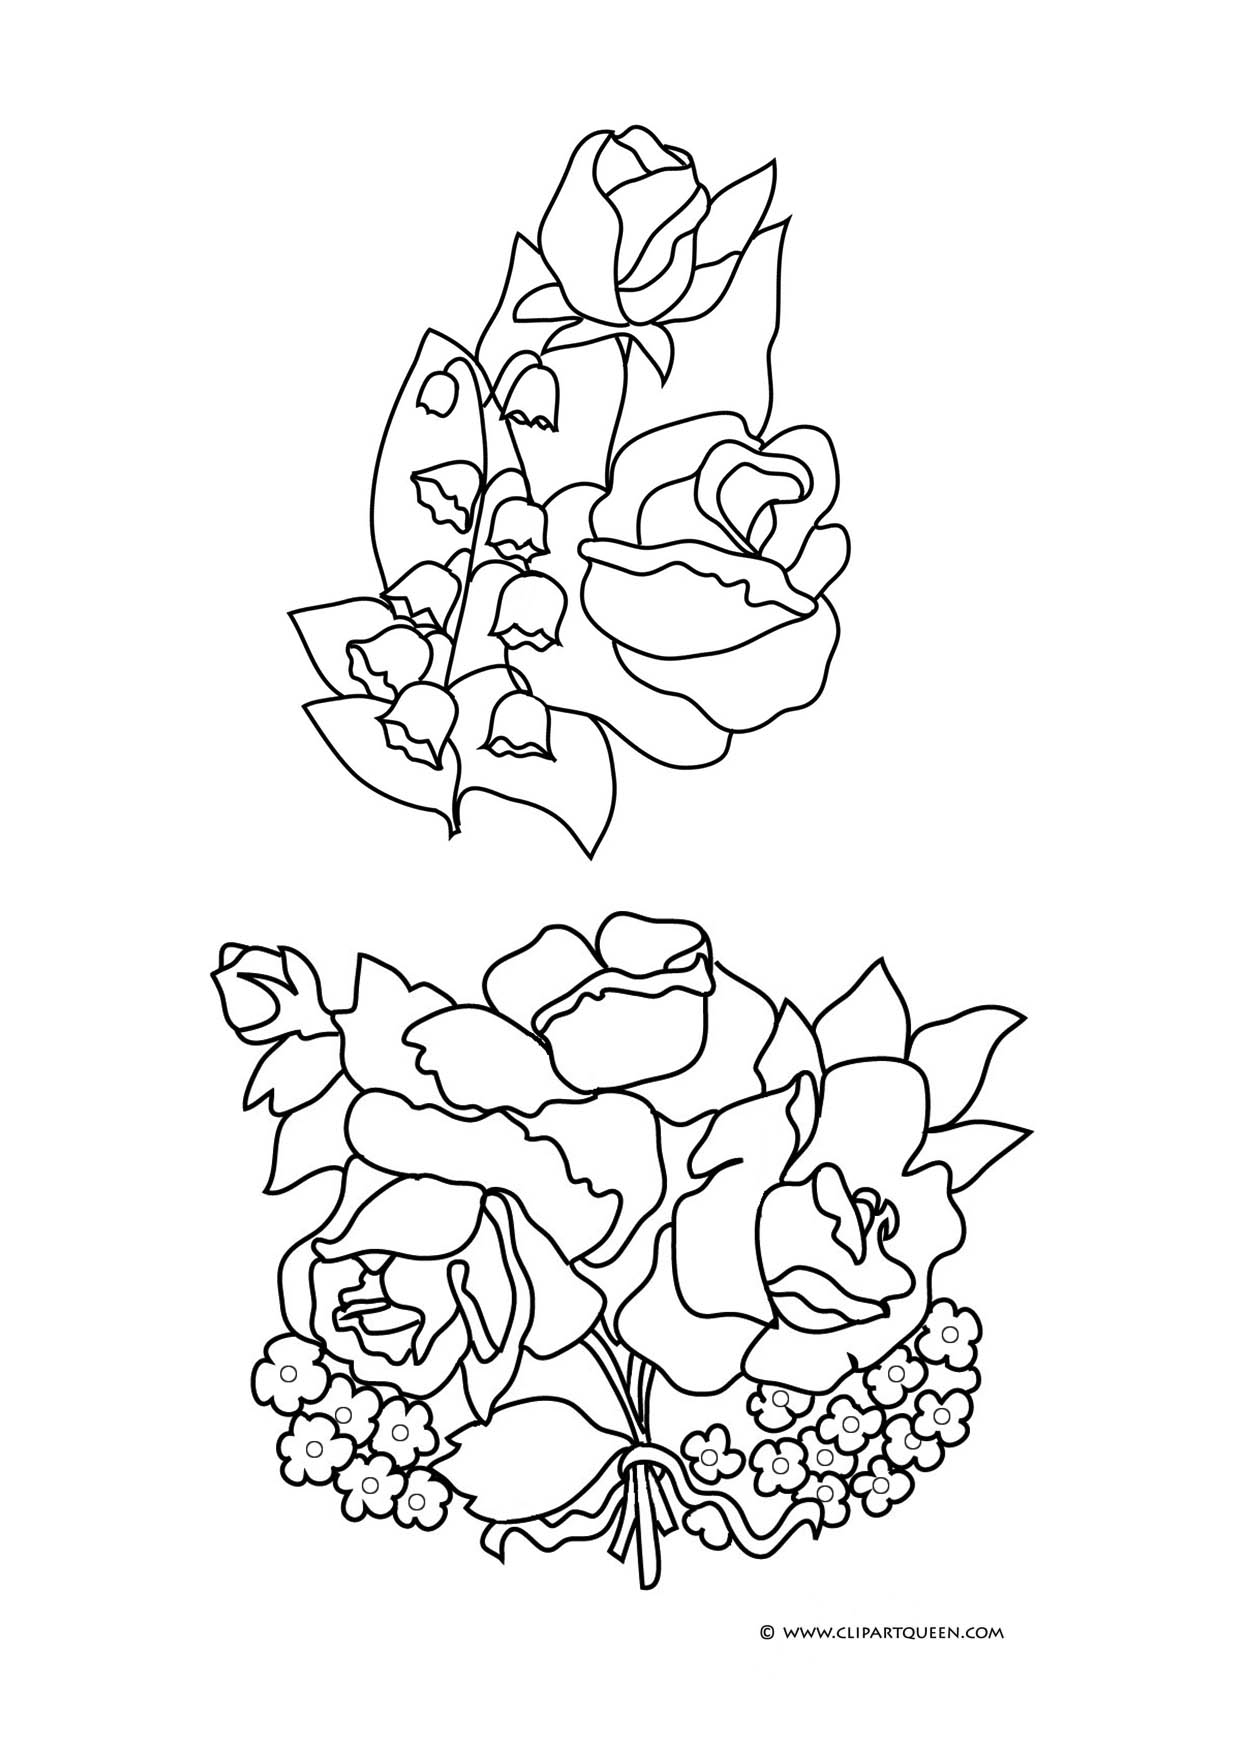 Lily Of The Valley Coloring Pages at GetColorings.com | Free printable